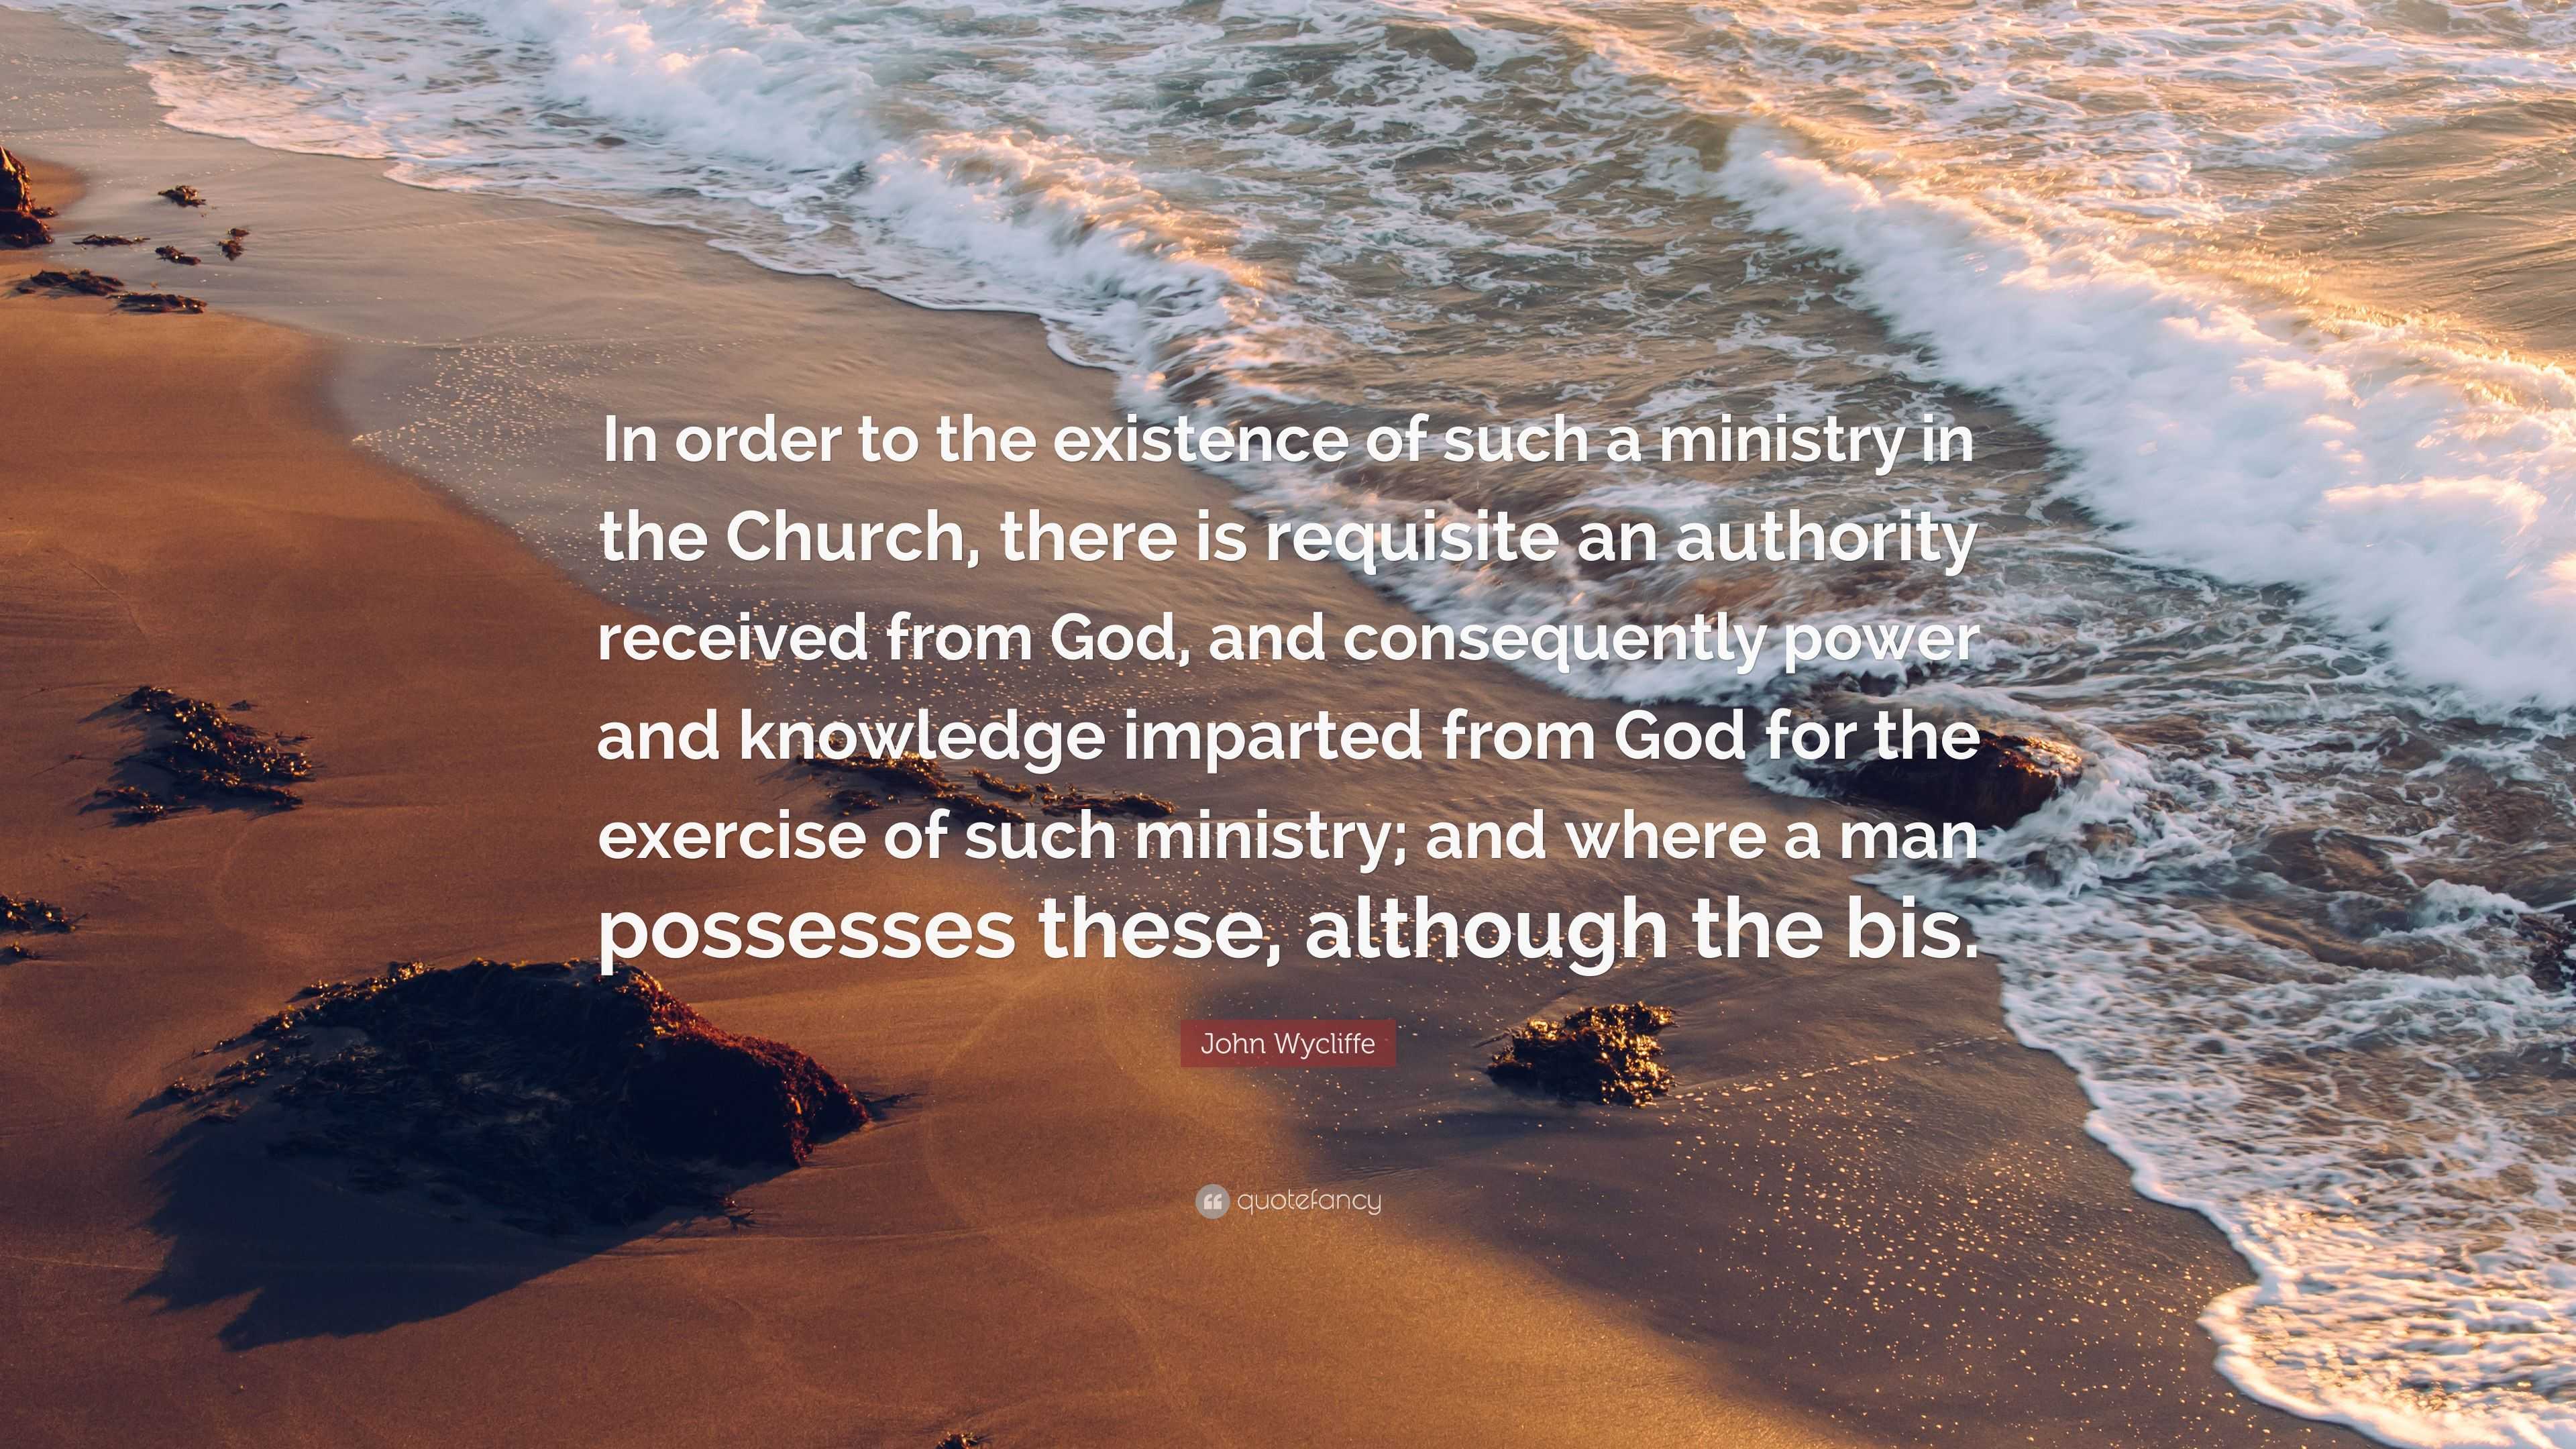 John Wycliffe Quote “In order to the existence of such a ministry in